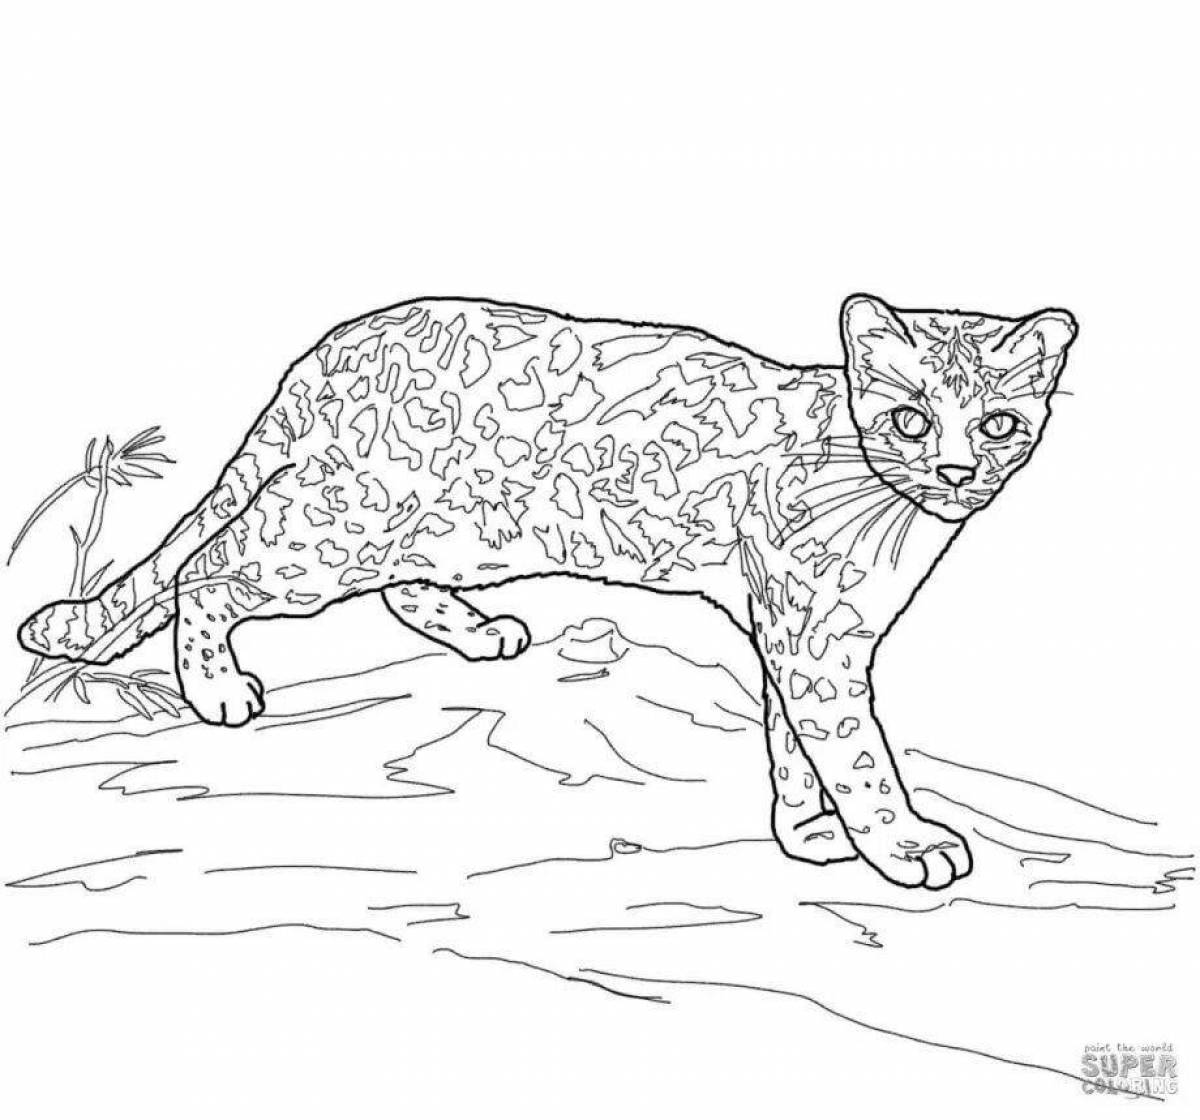 Colorful ocelot coloring book